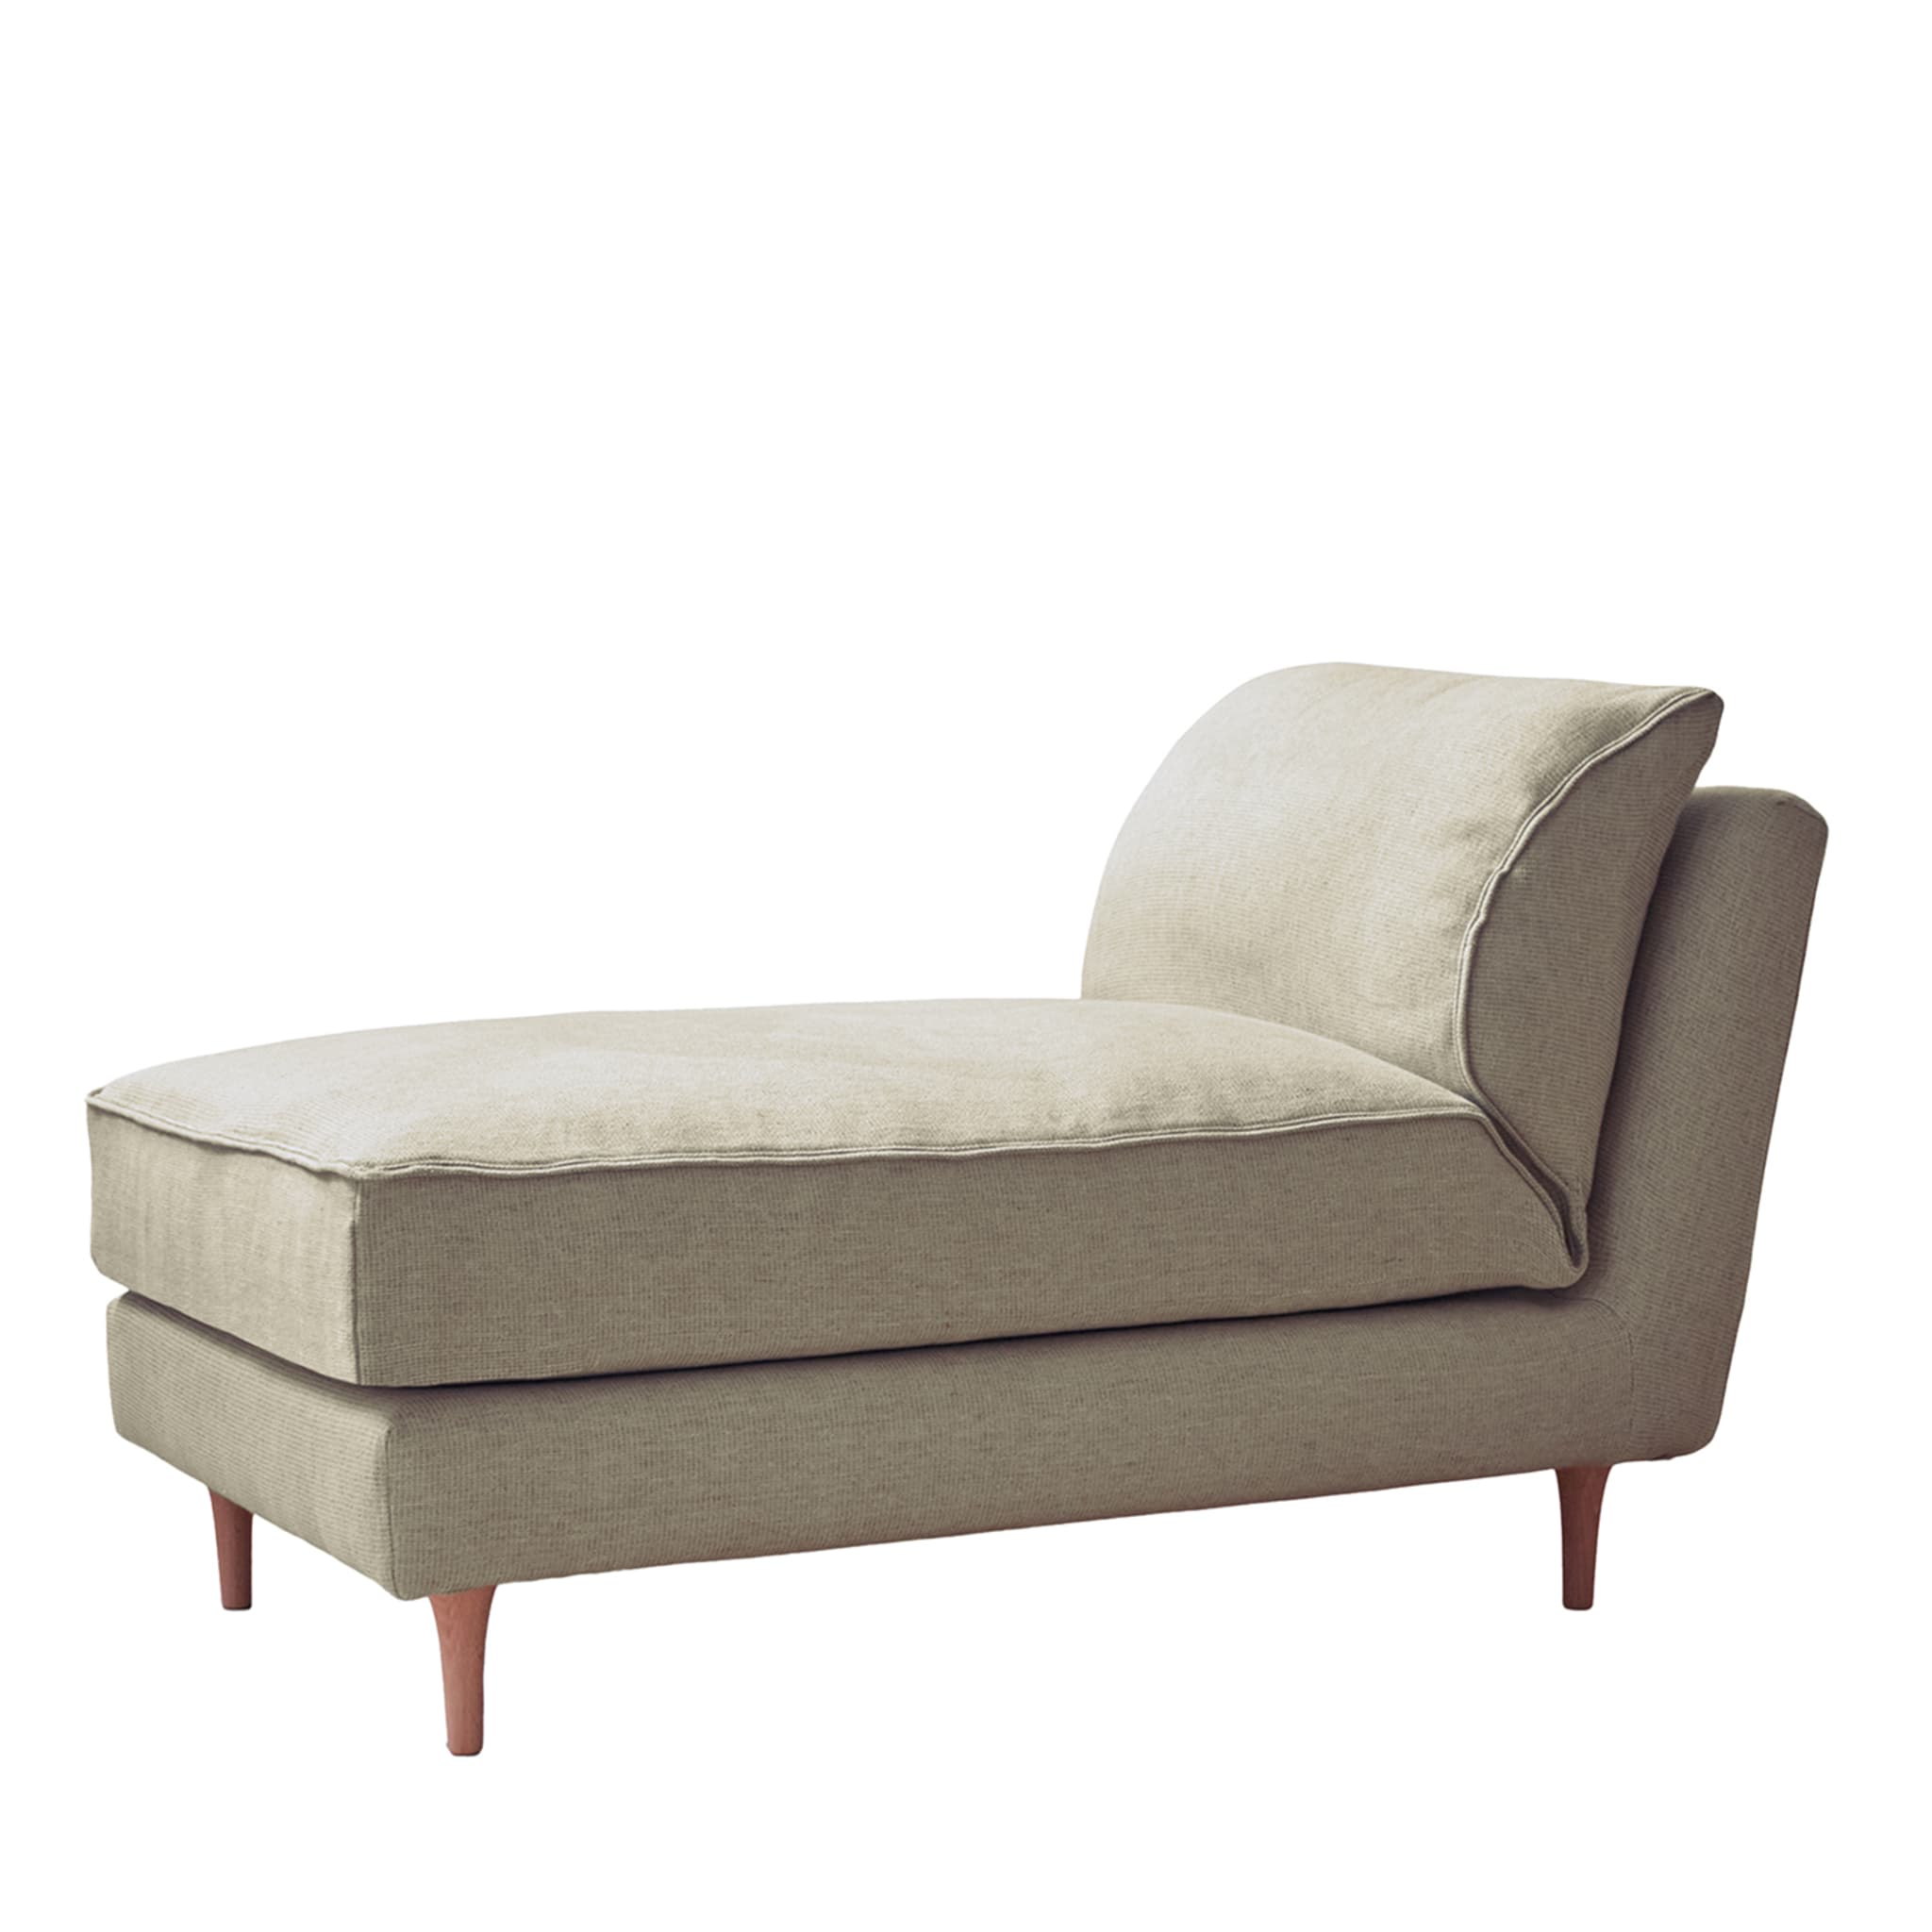 Casquet Classic Short in Pure Linen Daybed - Main view